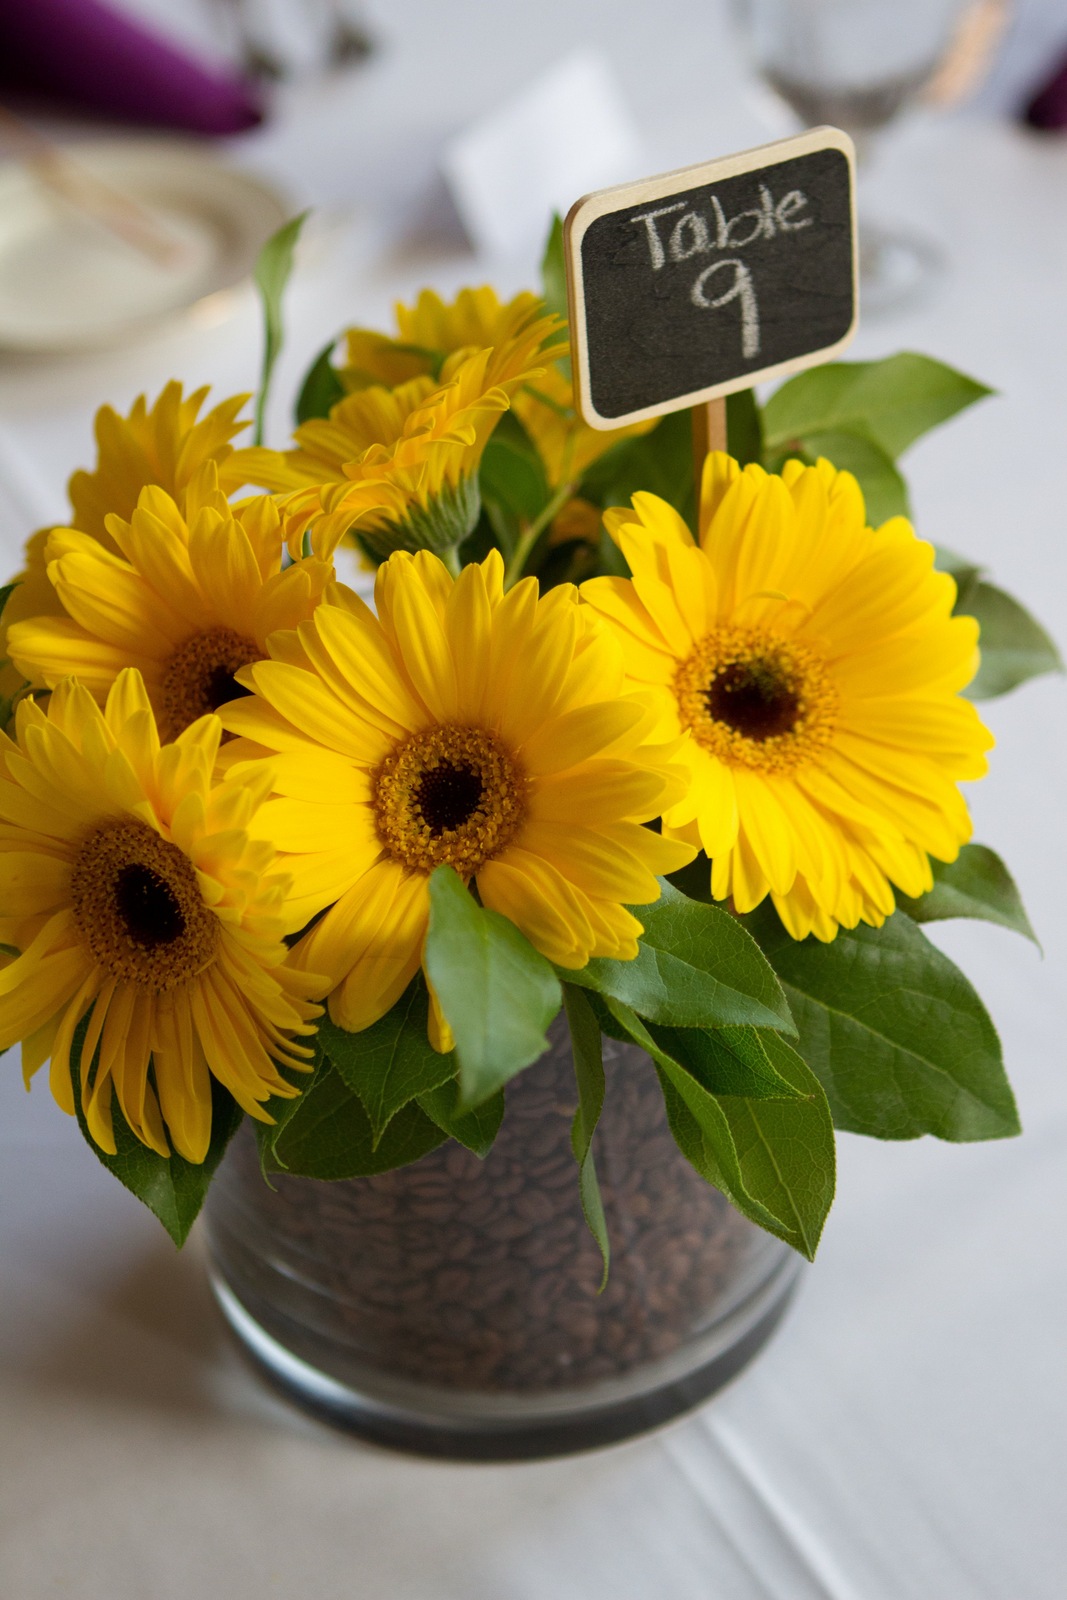 Wedding Brunch Reception - Yellow Gerbera Daisy Centerpiece with Coffee Beans by Lane & Lenge - Photo Courtesy of Brian Samuels Photography